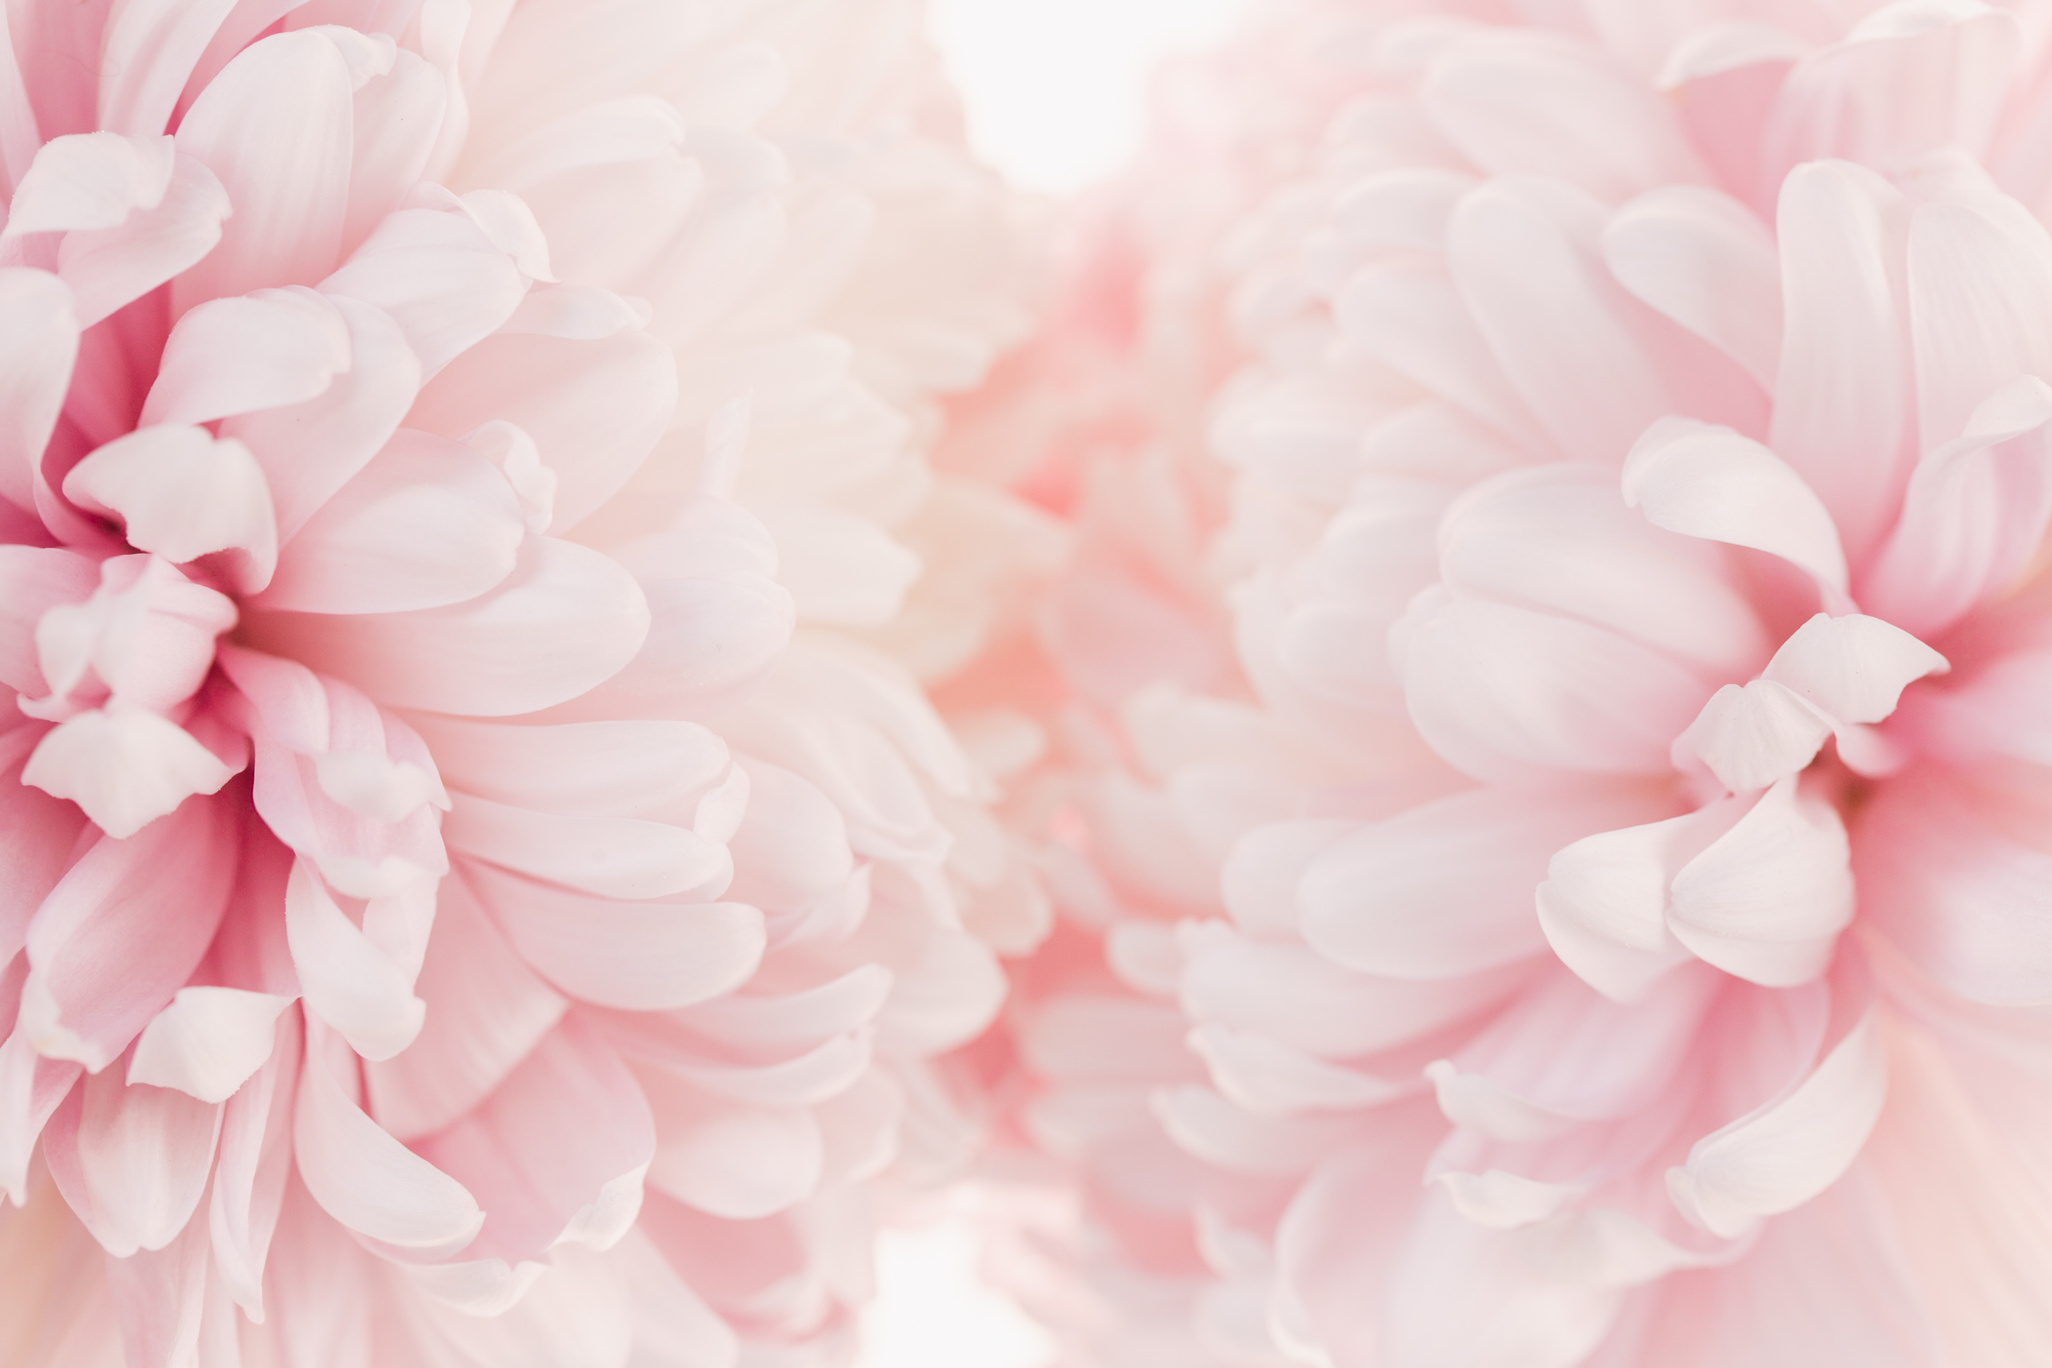 Peony flower .Peony petals background.Floral background.Floral delicate wallpaper.Beautiful Floral background in pale pink and white colors.blooming Flowers